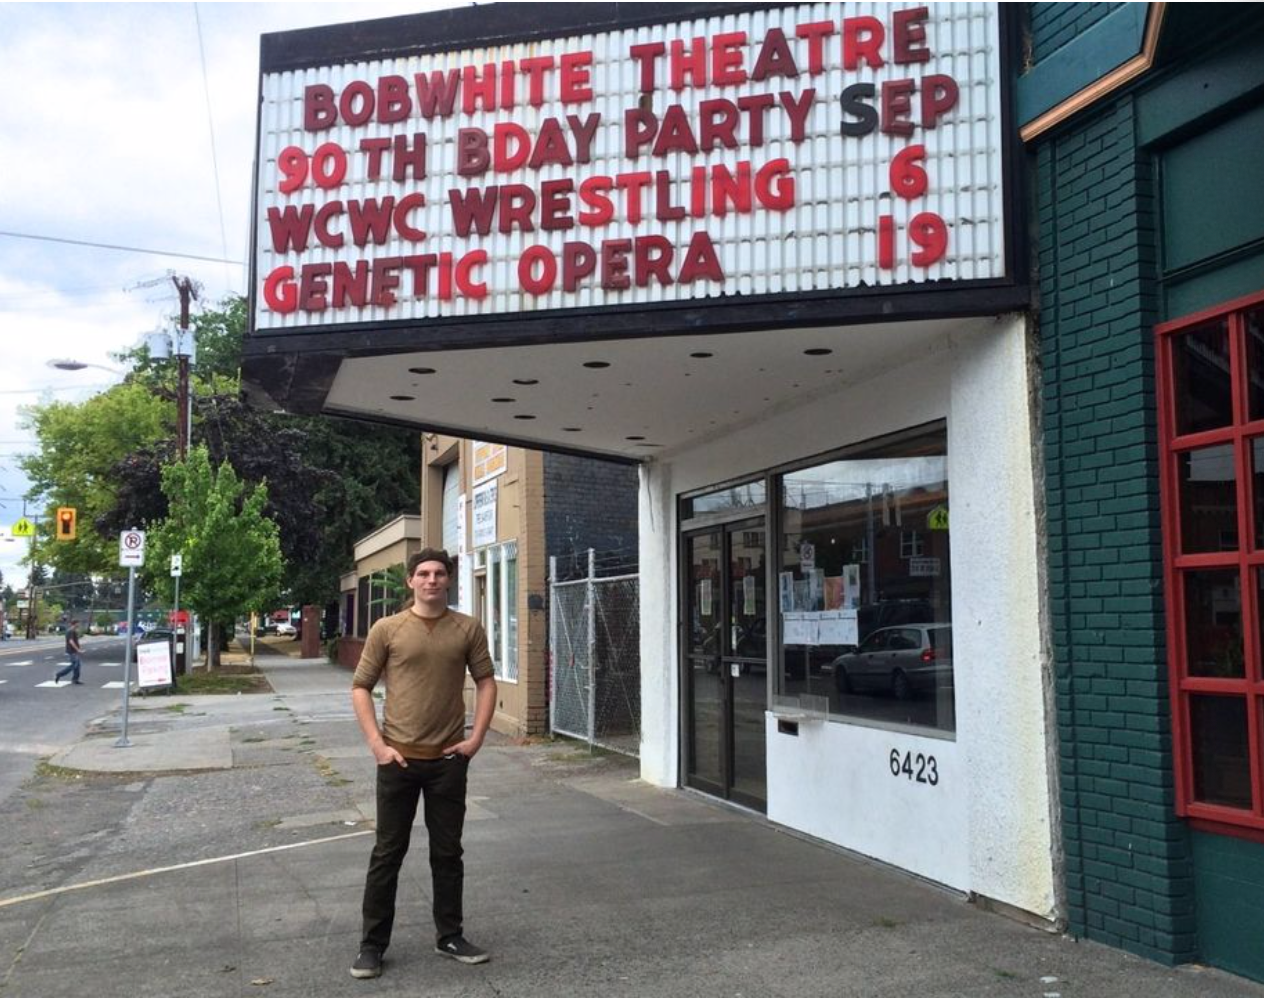 Nick Haas in front of The Bob White Theatre, Portland, Oregon, 2014. Image courtesy of Melissa Binder/The Oregonian